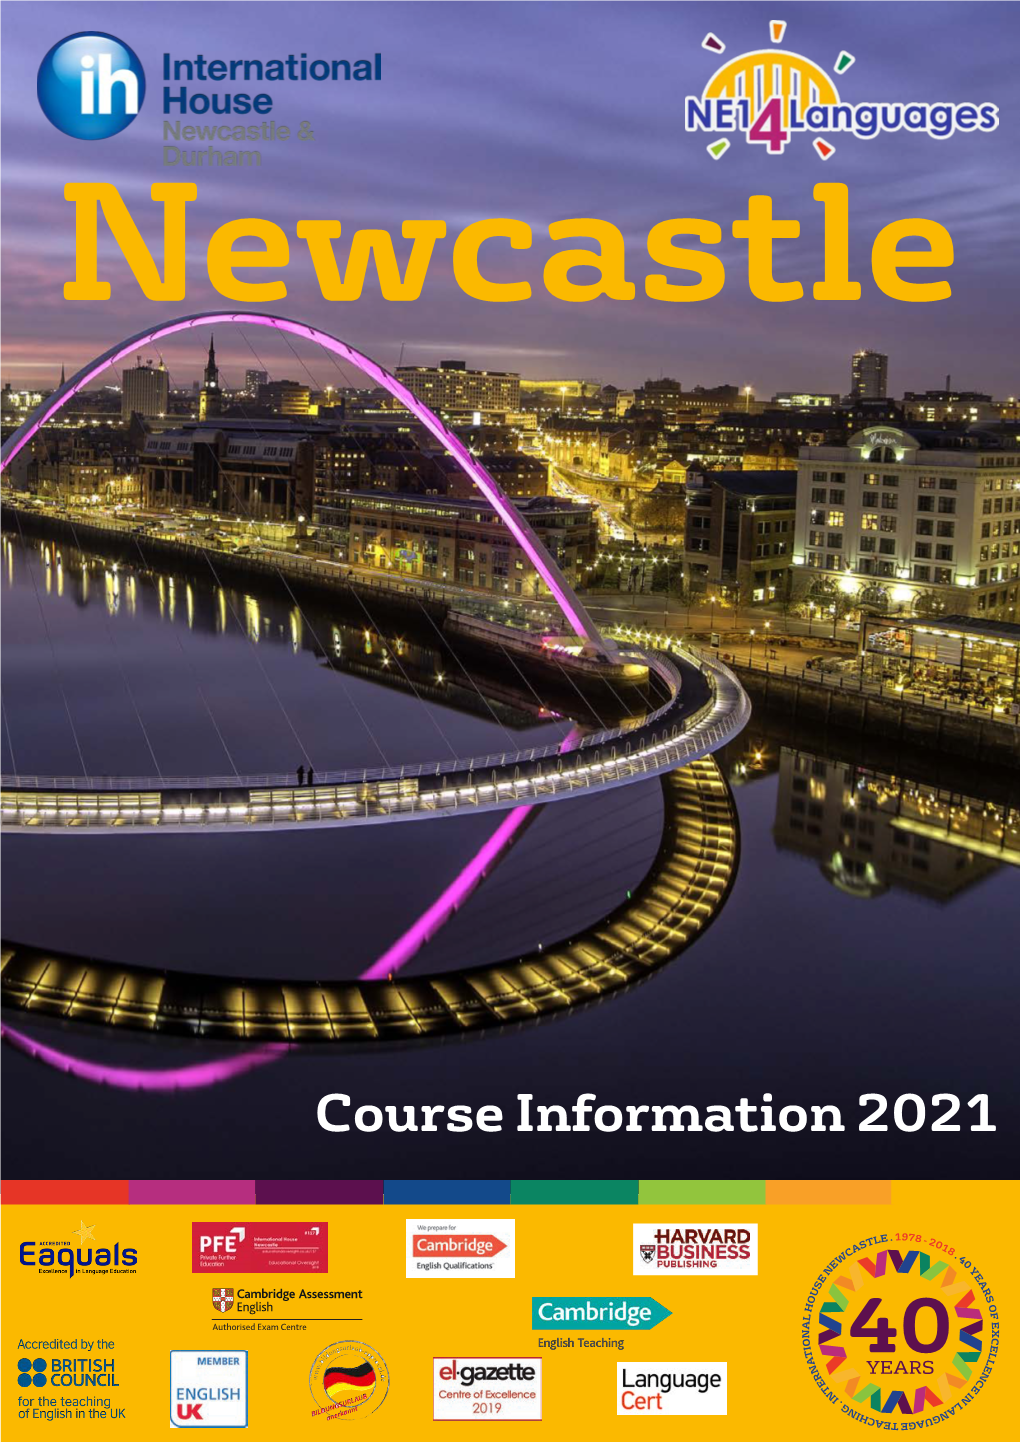 Course Information 2021